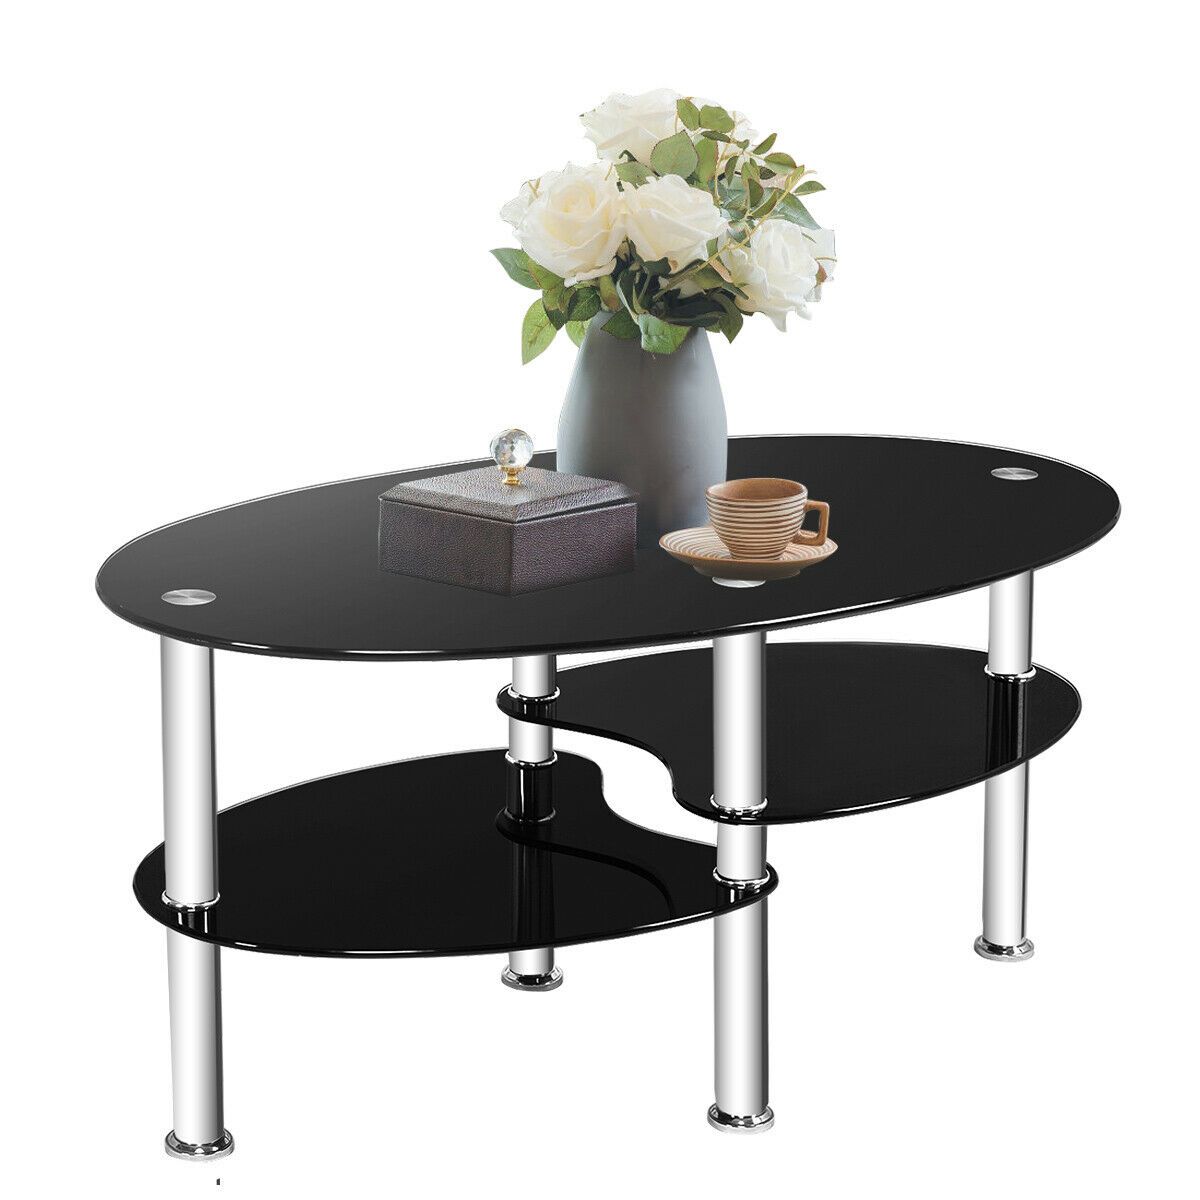 Tempered Glass Oval Side Coffee Table Shelf Chrome Base Living Room Pertaining To Tempered Glass Oval Side Tables (Gallery 3 of 20)